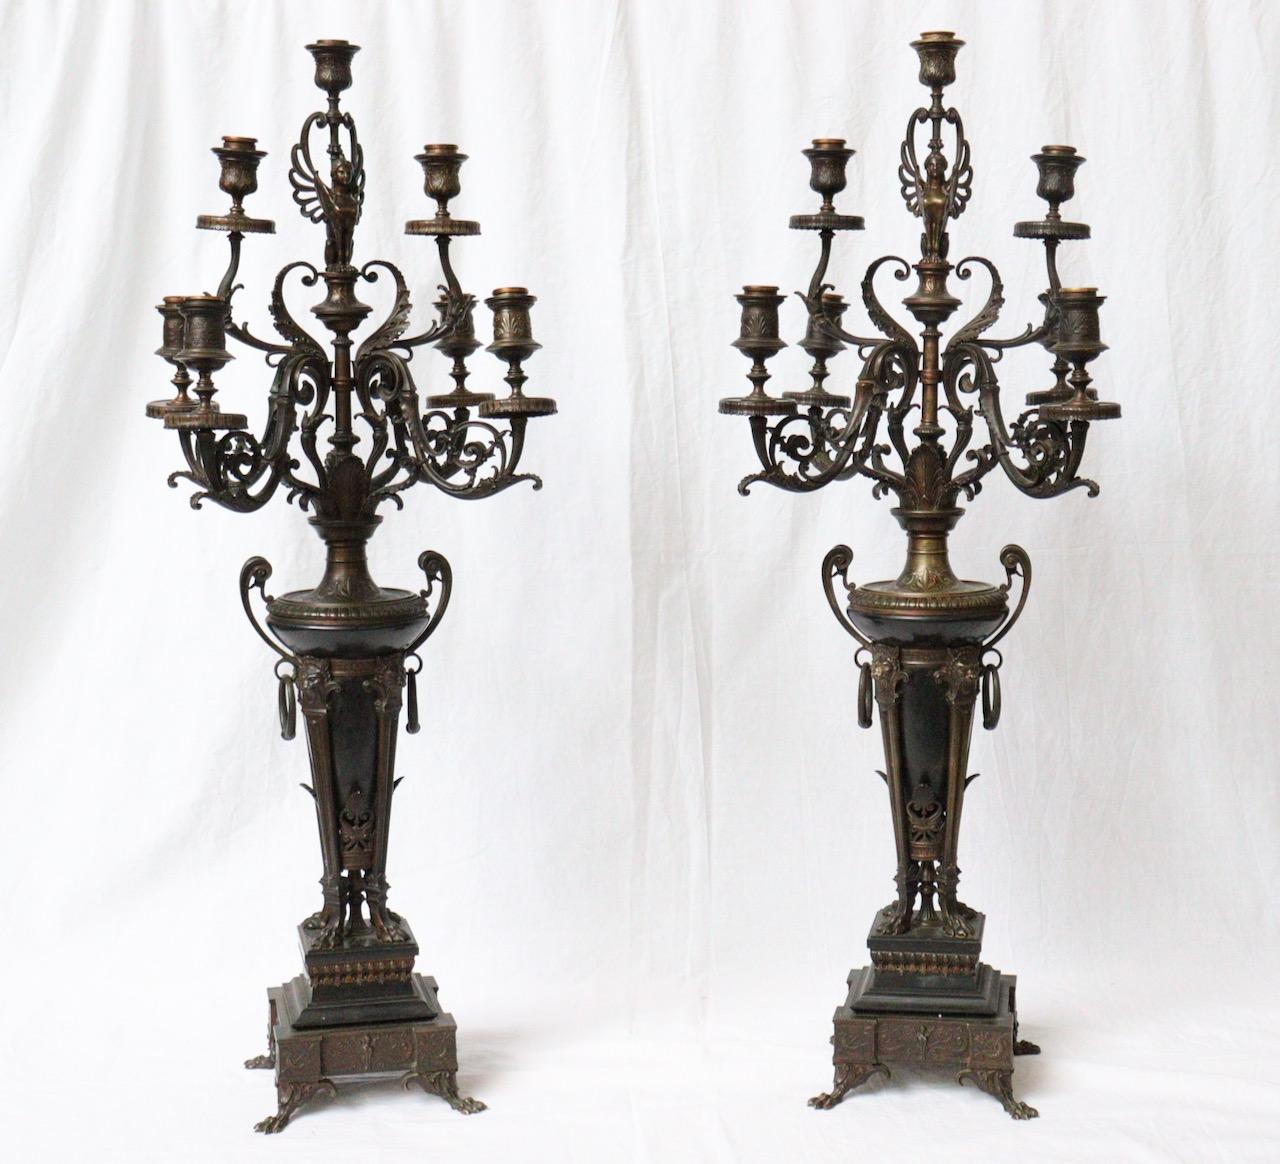 Napoleon III 19th Century French Marnyhac & Cie and Math, Moreau Three-Pieces Clock Garniture